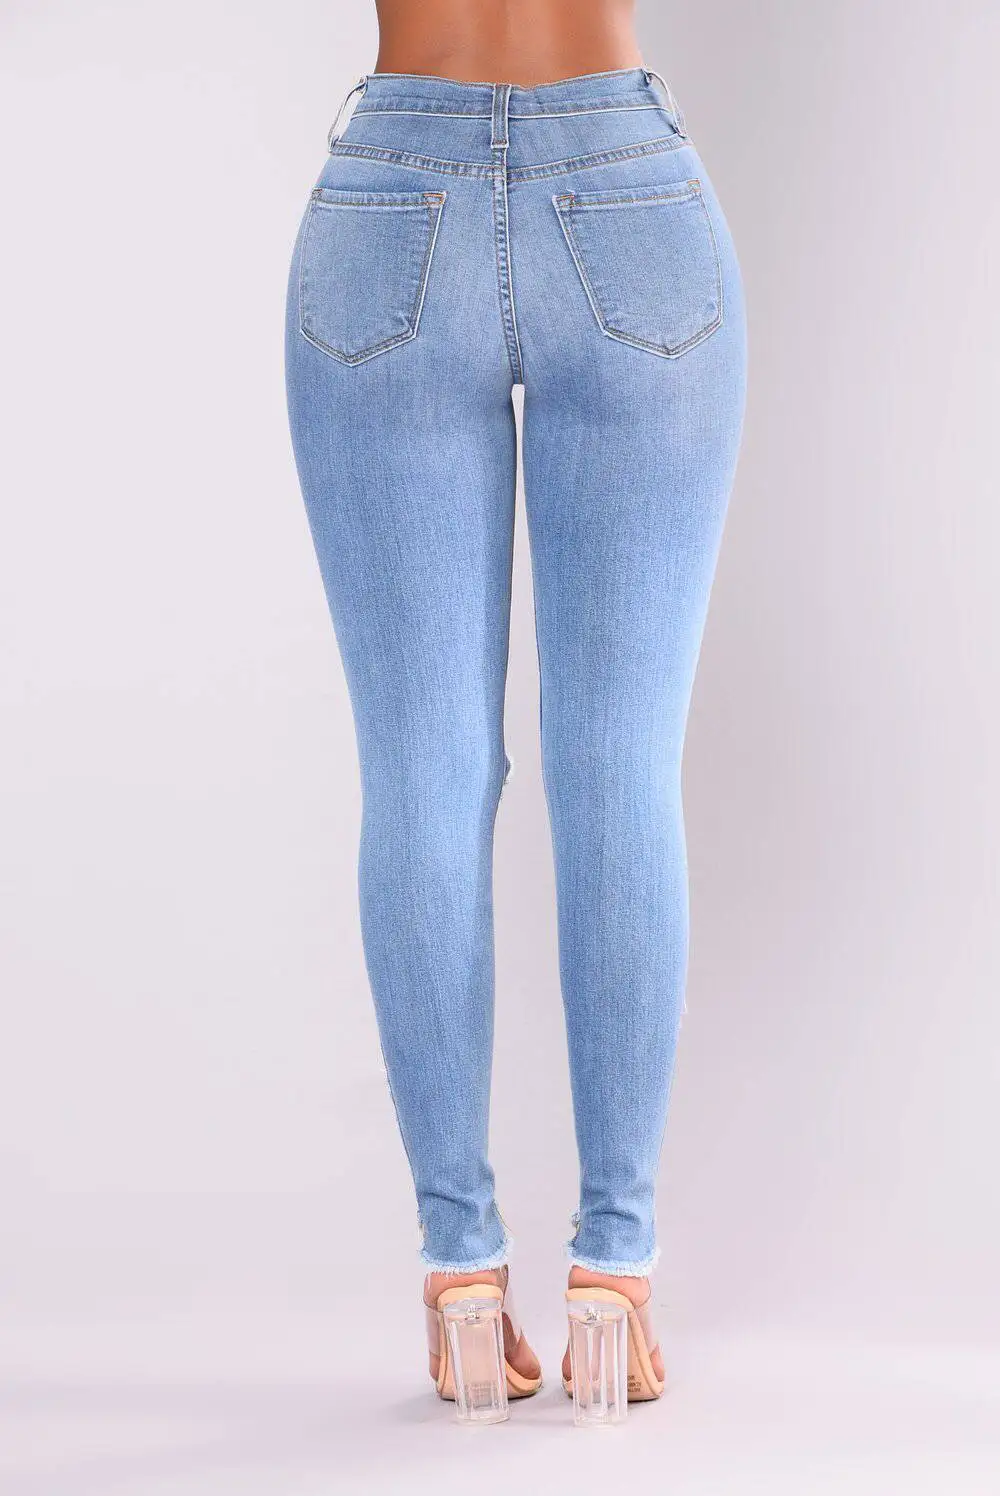 OEM&ODM New Fashion Design Denim High-Waisted Cut Seam and Split on Front  Side The Bottom Have Remove The Stitching After Washing Middle Blue Color  Lady Jeans - China Skinny Jeans and Denim